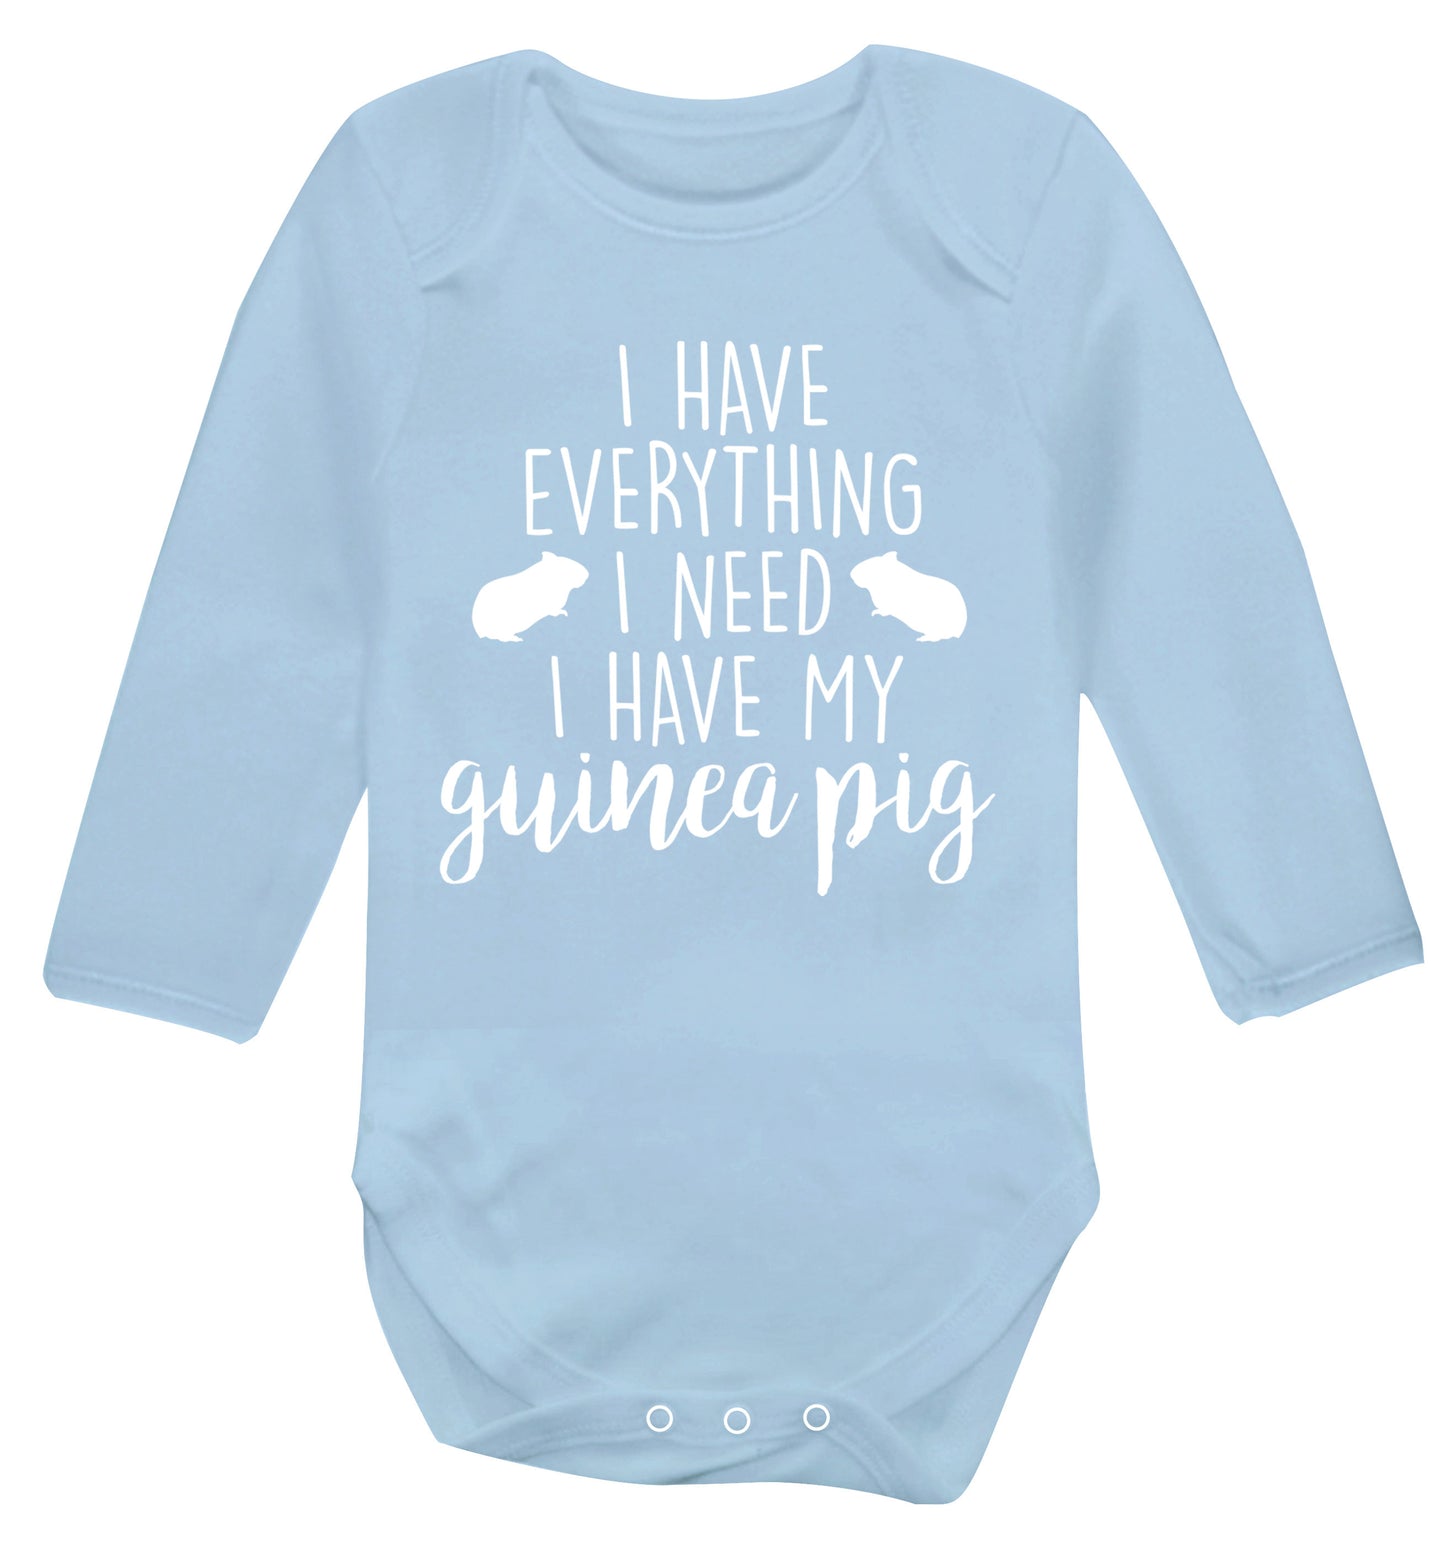 I have everything I need, I have my guinea pig Baby Vest long sleeved pale blue 6-12 months